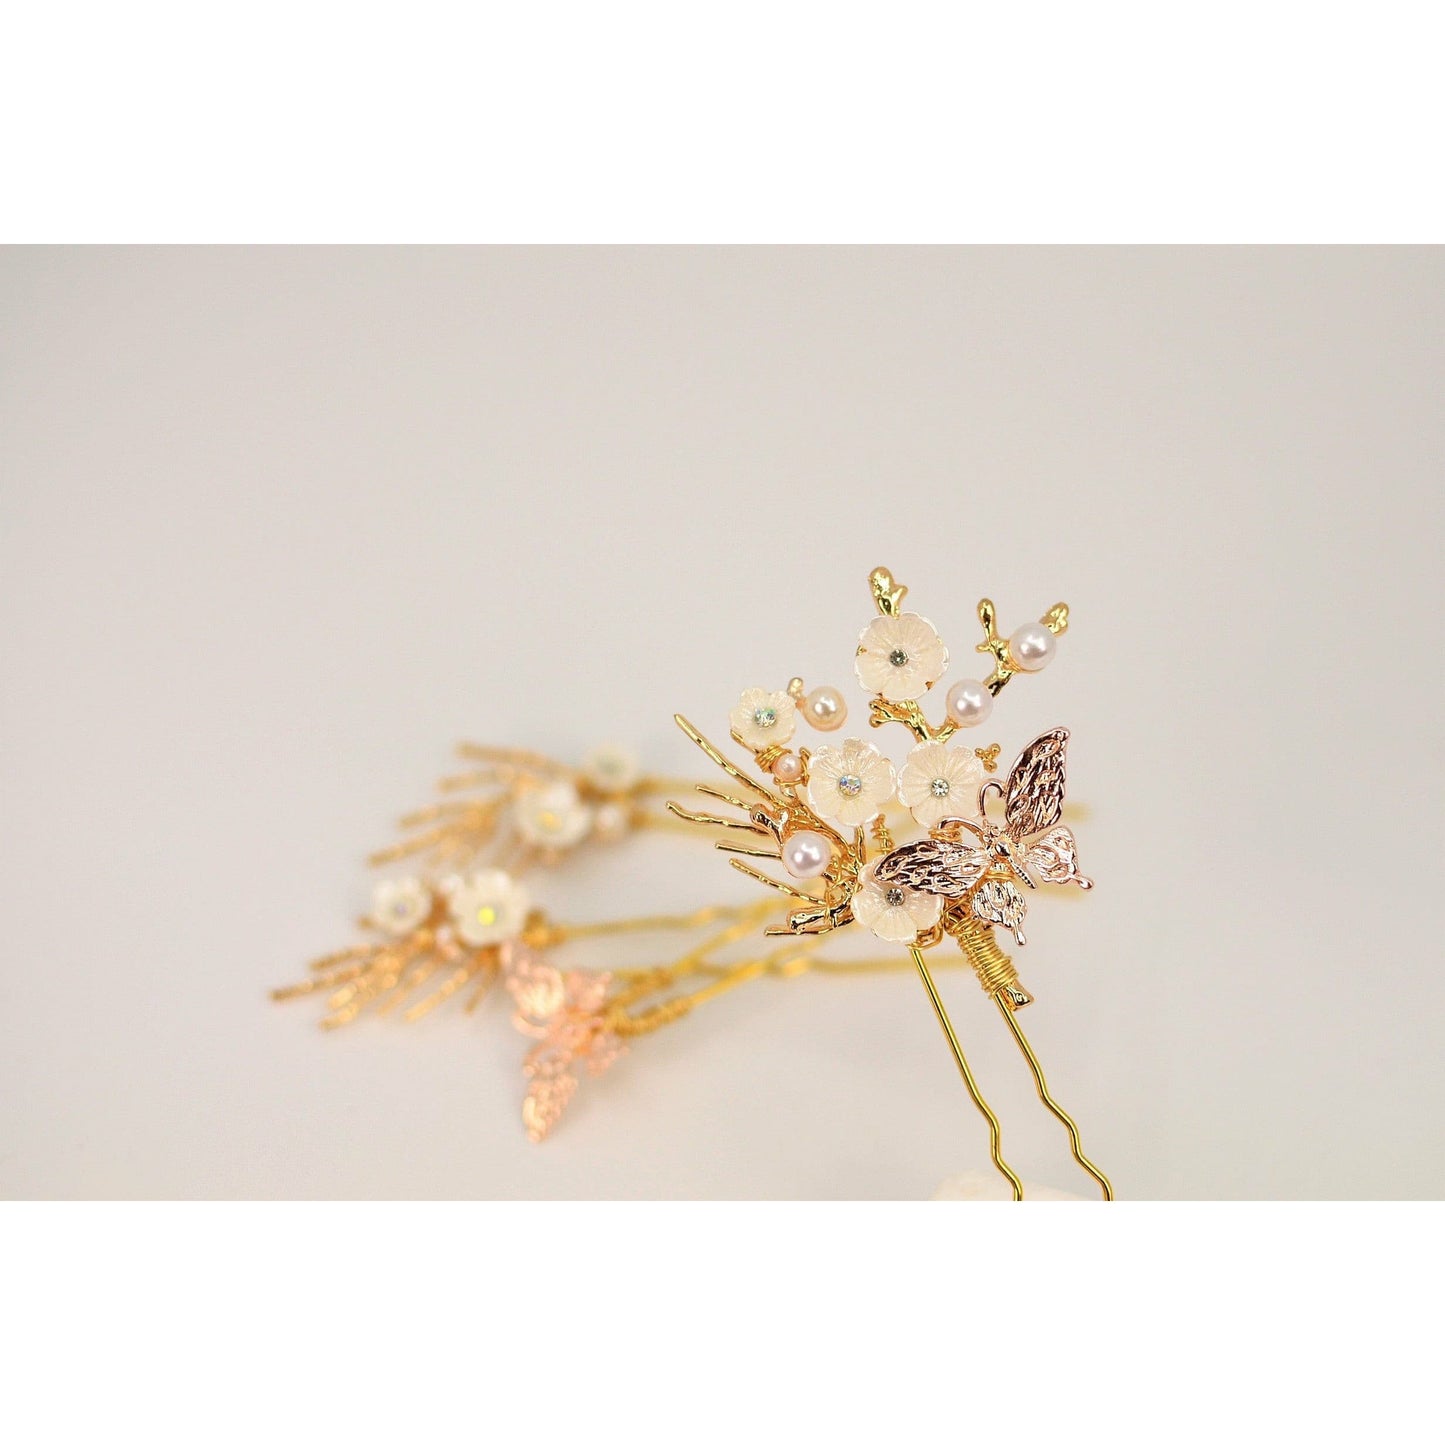 Butterfly and flower Hair U pins.